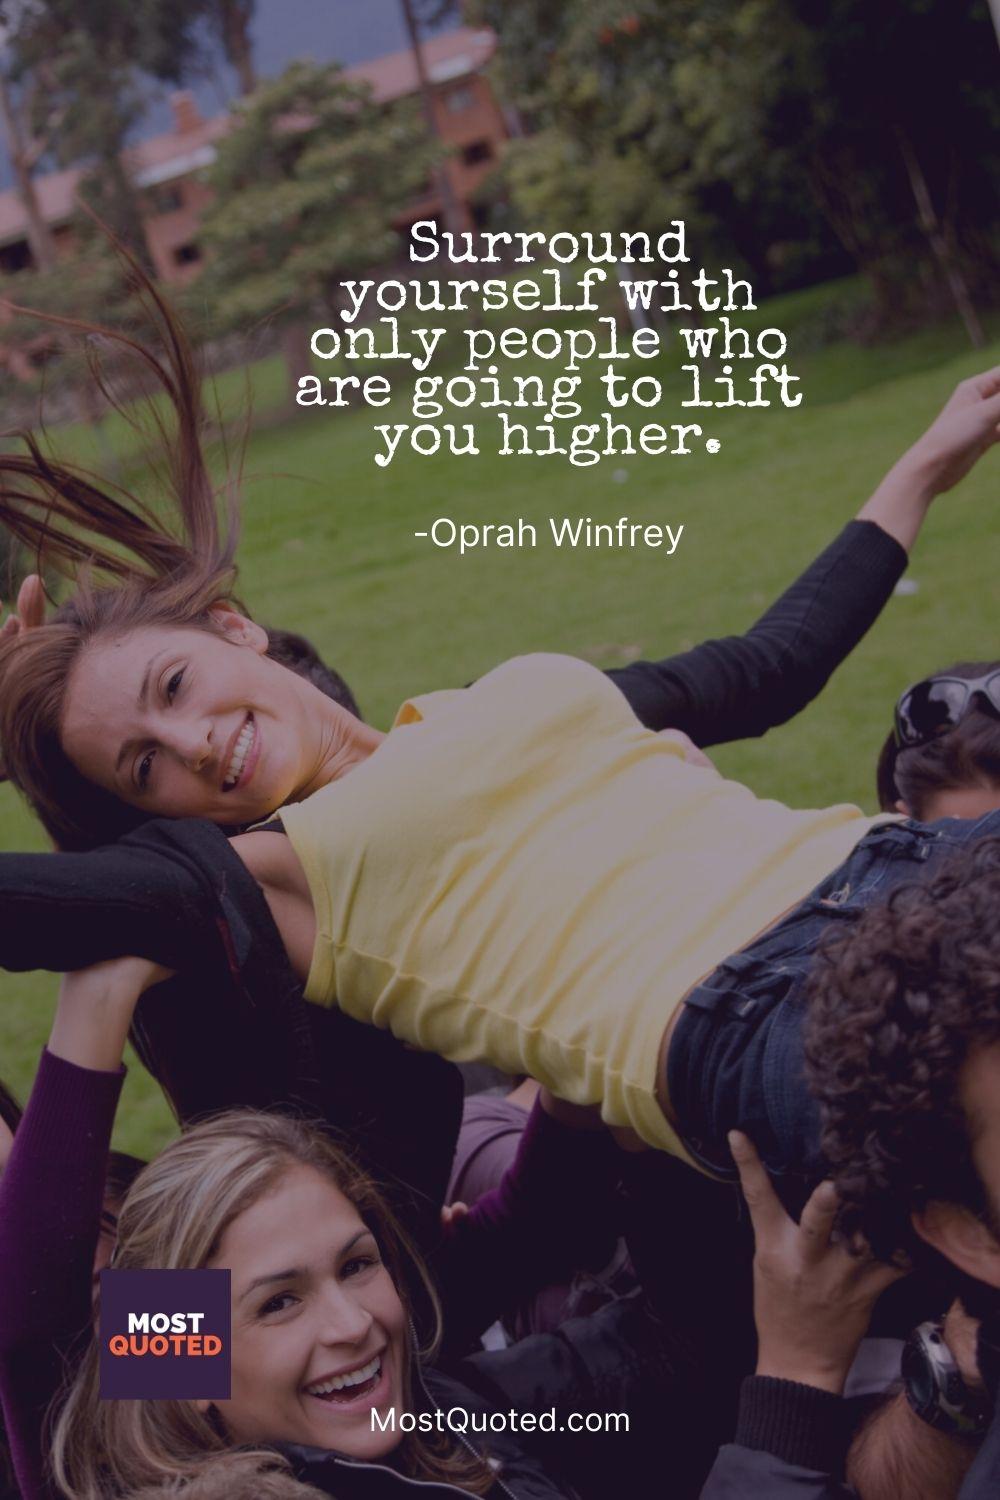 Surround yourself with only people who are going to lift you higher. - Oprah Winfrey